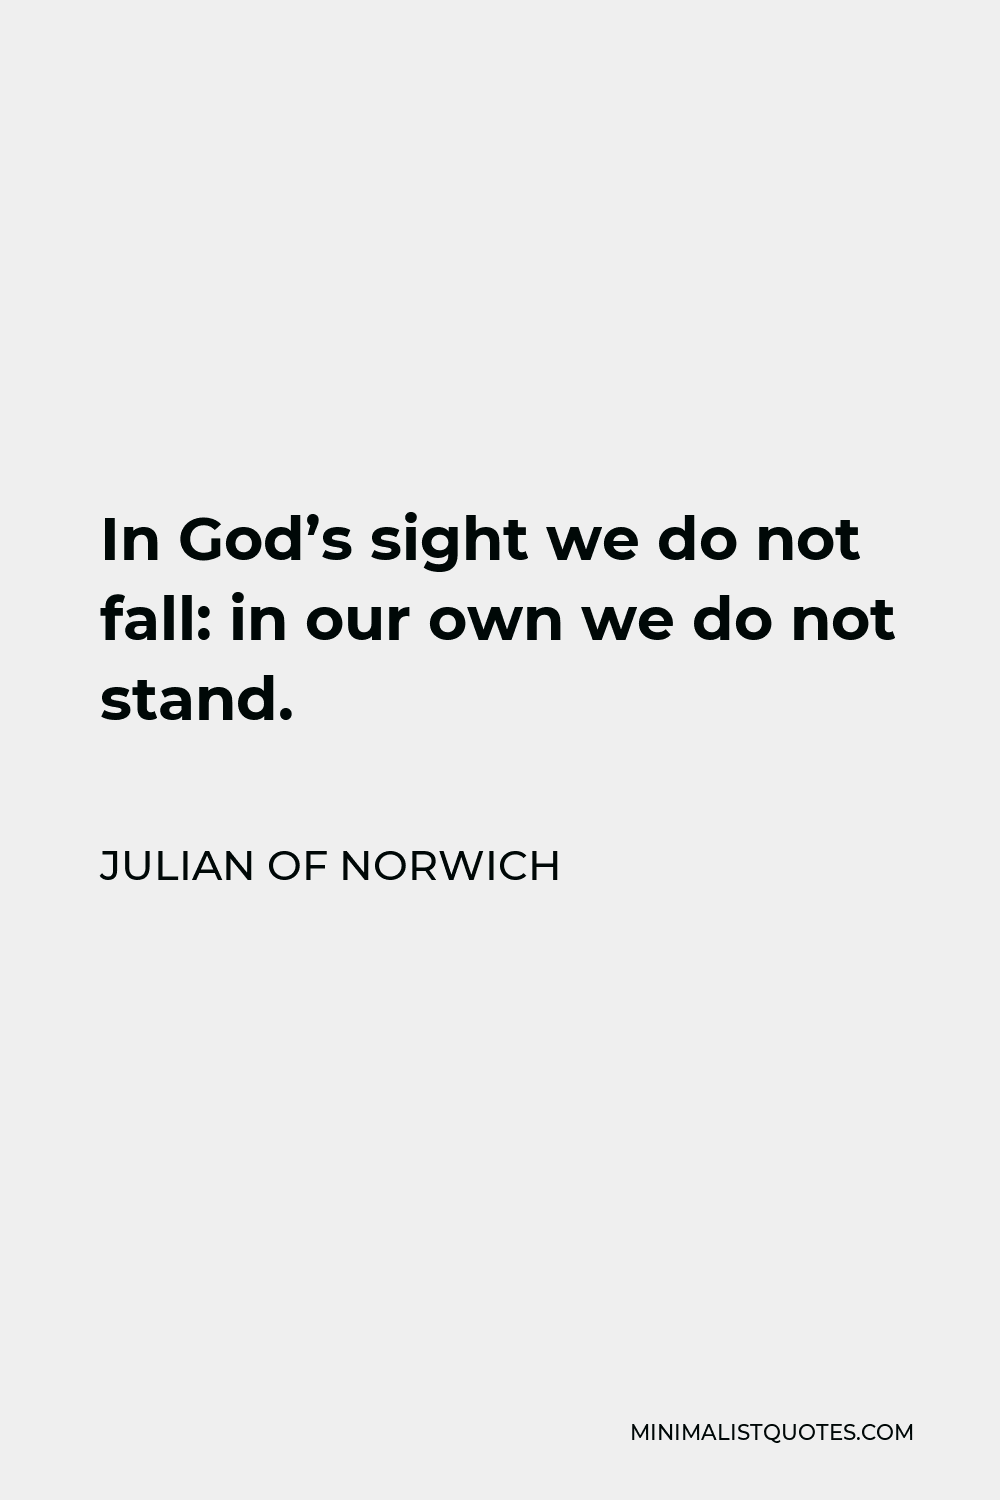 Julian of Norwich Quote - In God’s sight we do not fall: in our own we do not stand.